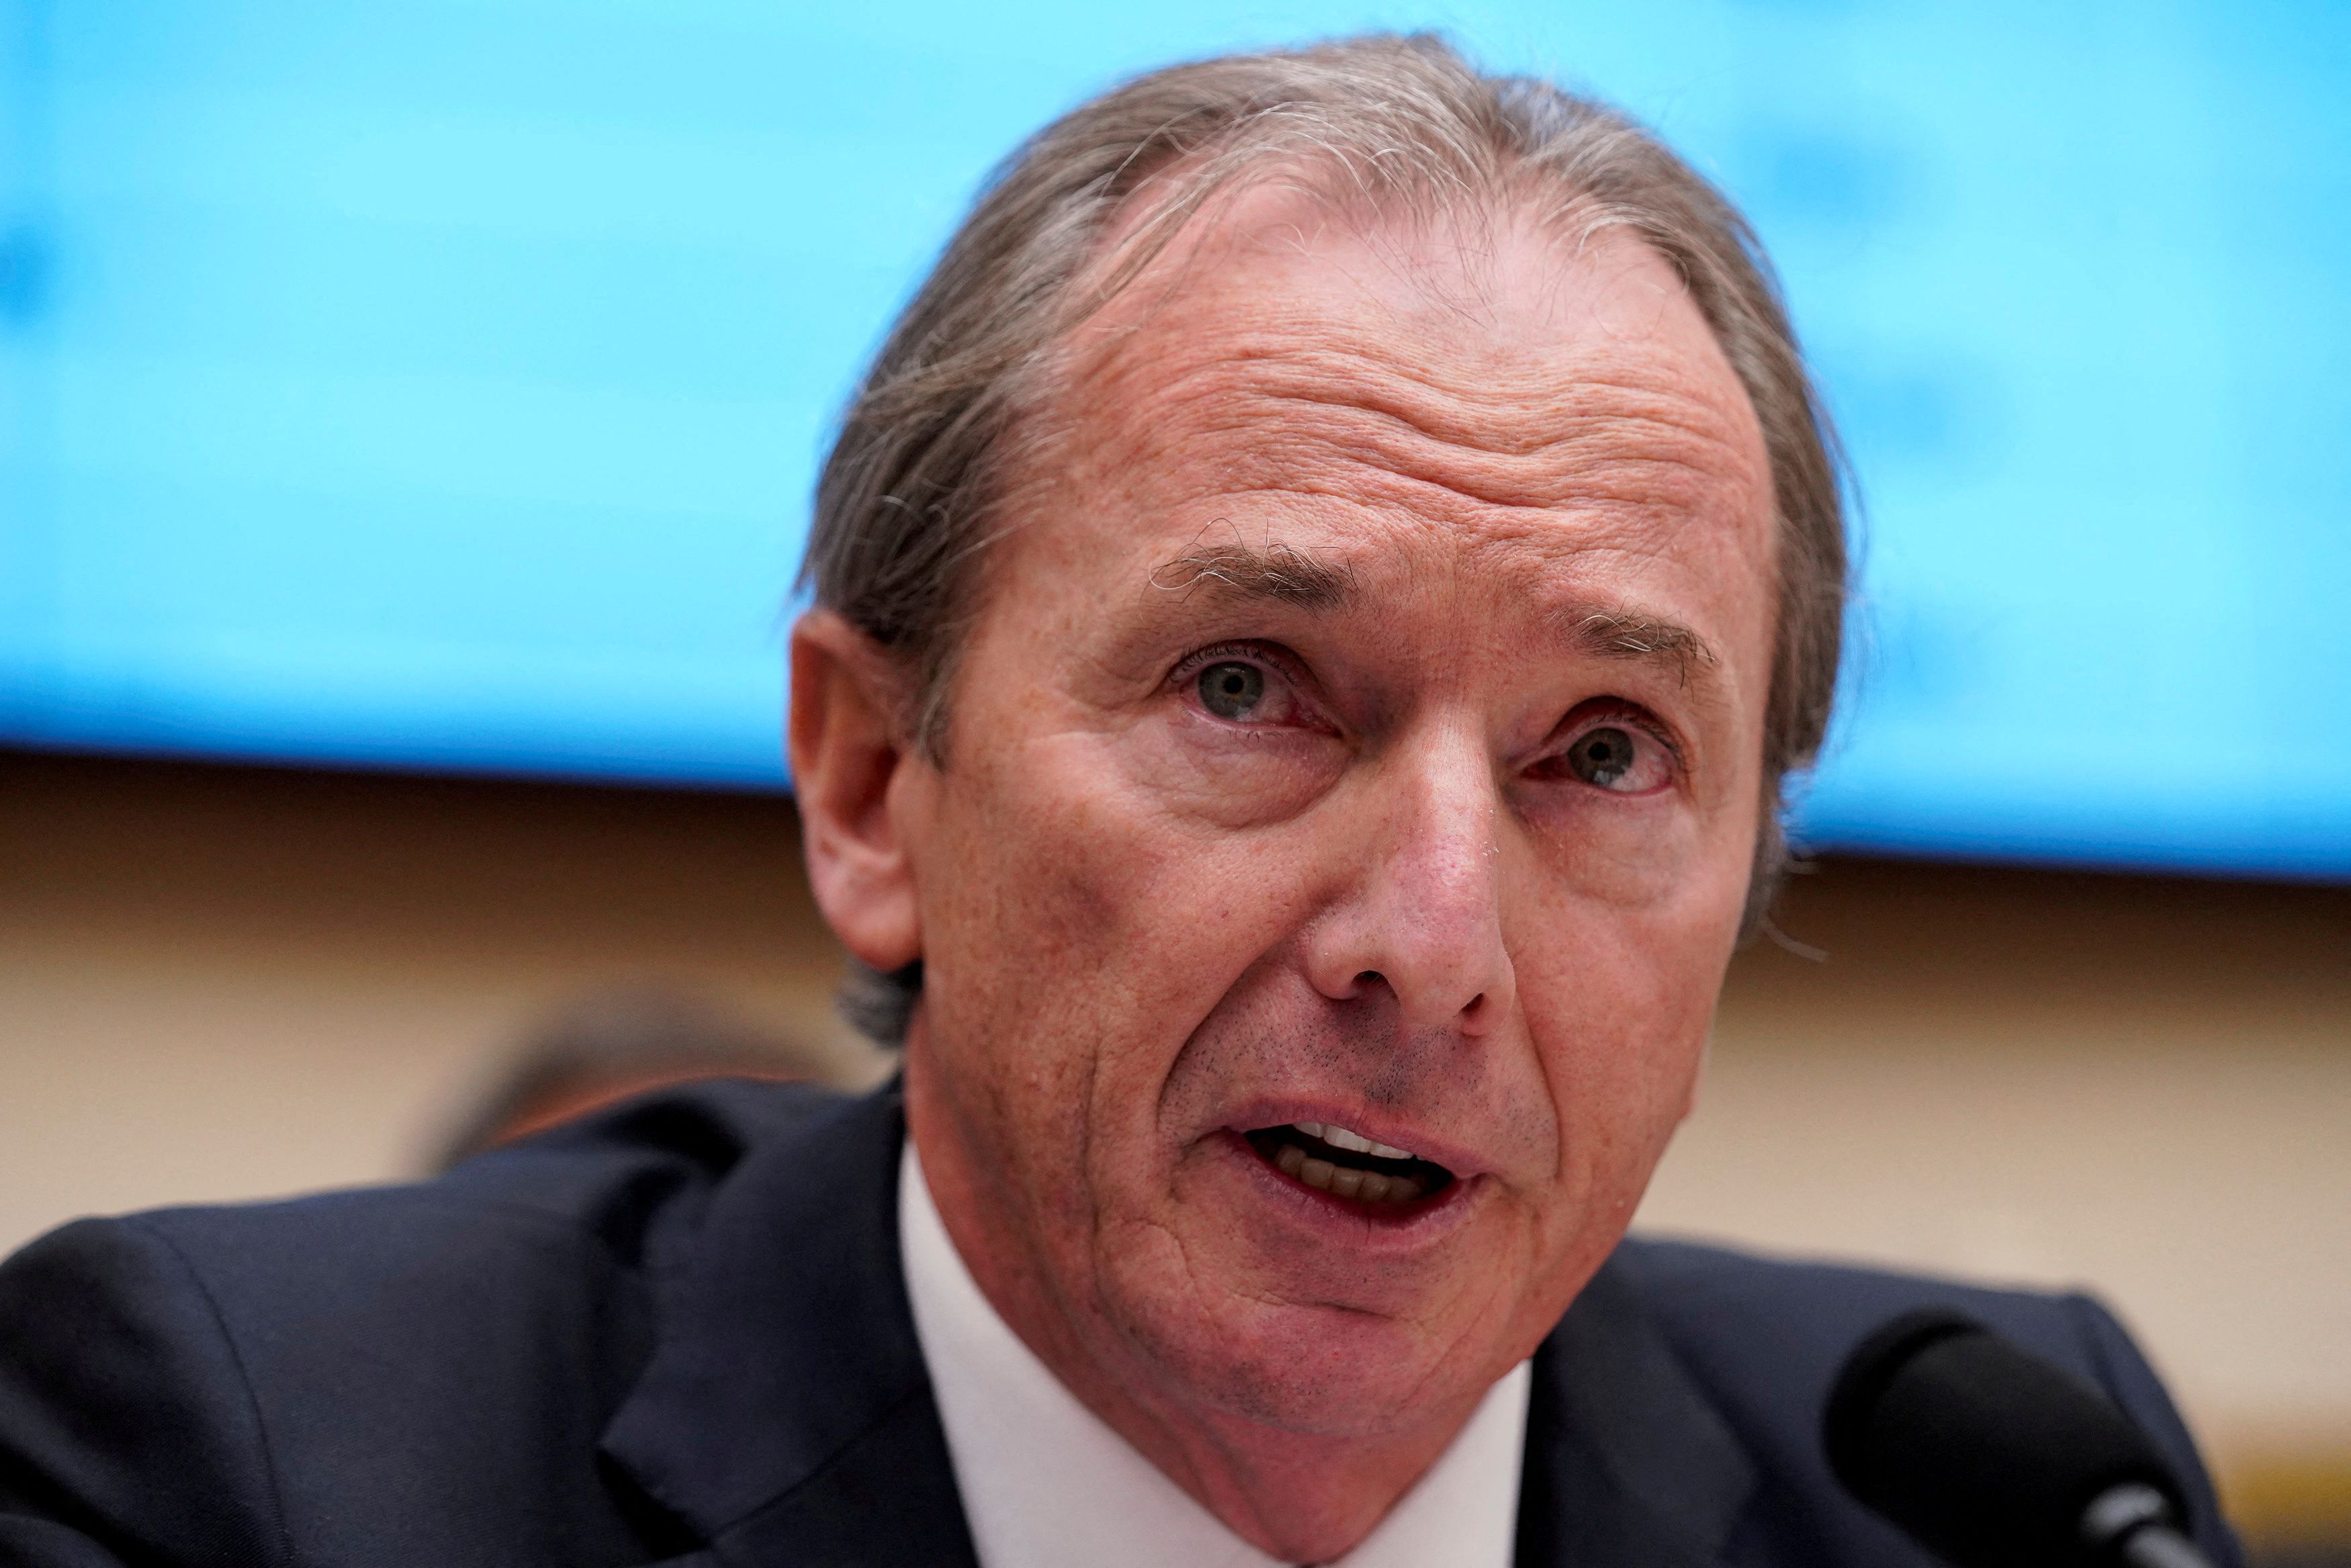 James P. Gorman, chairman & CEO of Morgan Stanley, testifies before a House Financial Services Committeeon Capitol Hill in Washington, U.S., April 10, 2019. REUTERS/Aaron P. Bernstein/File Photo